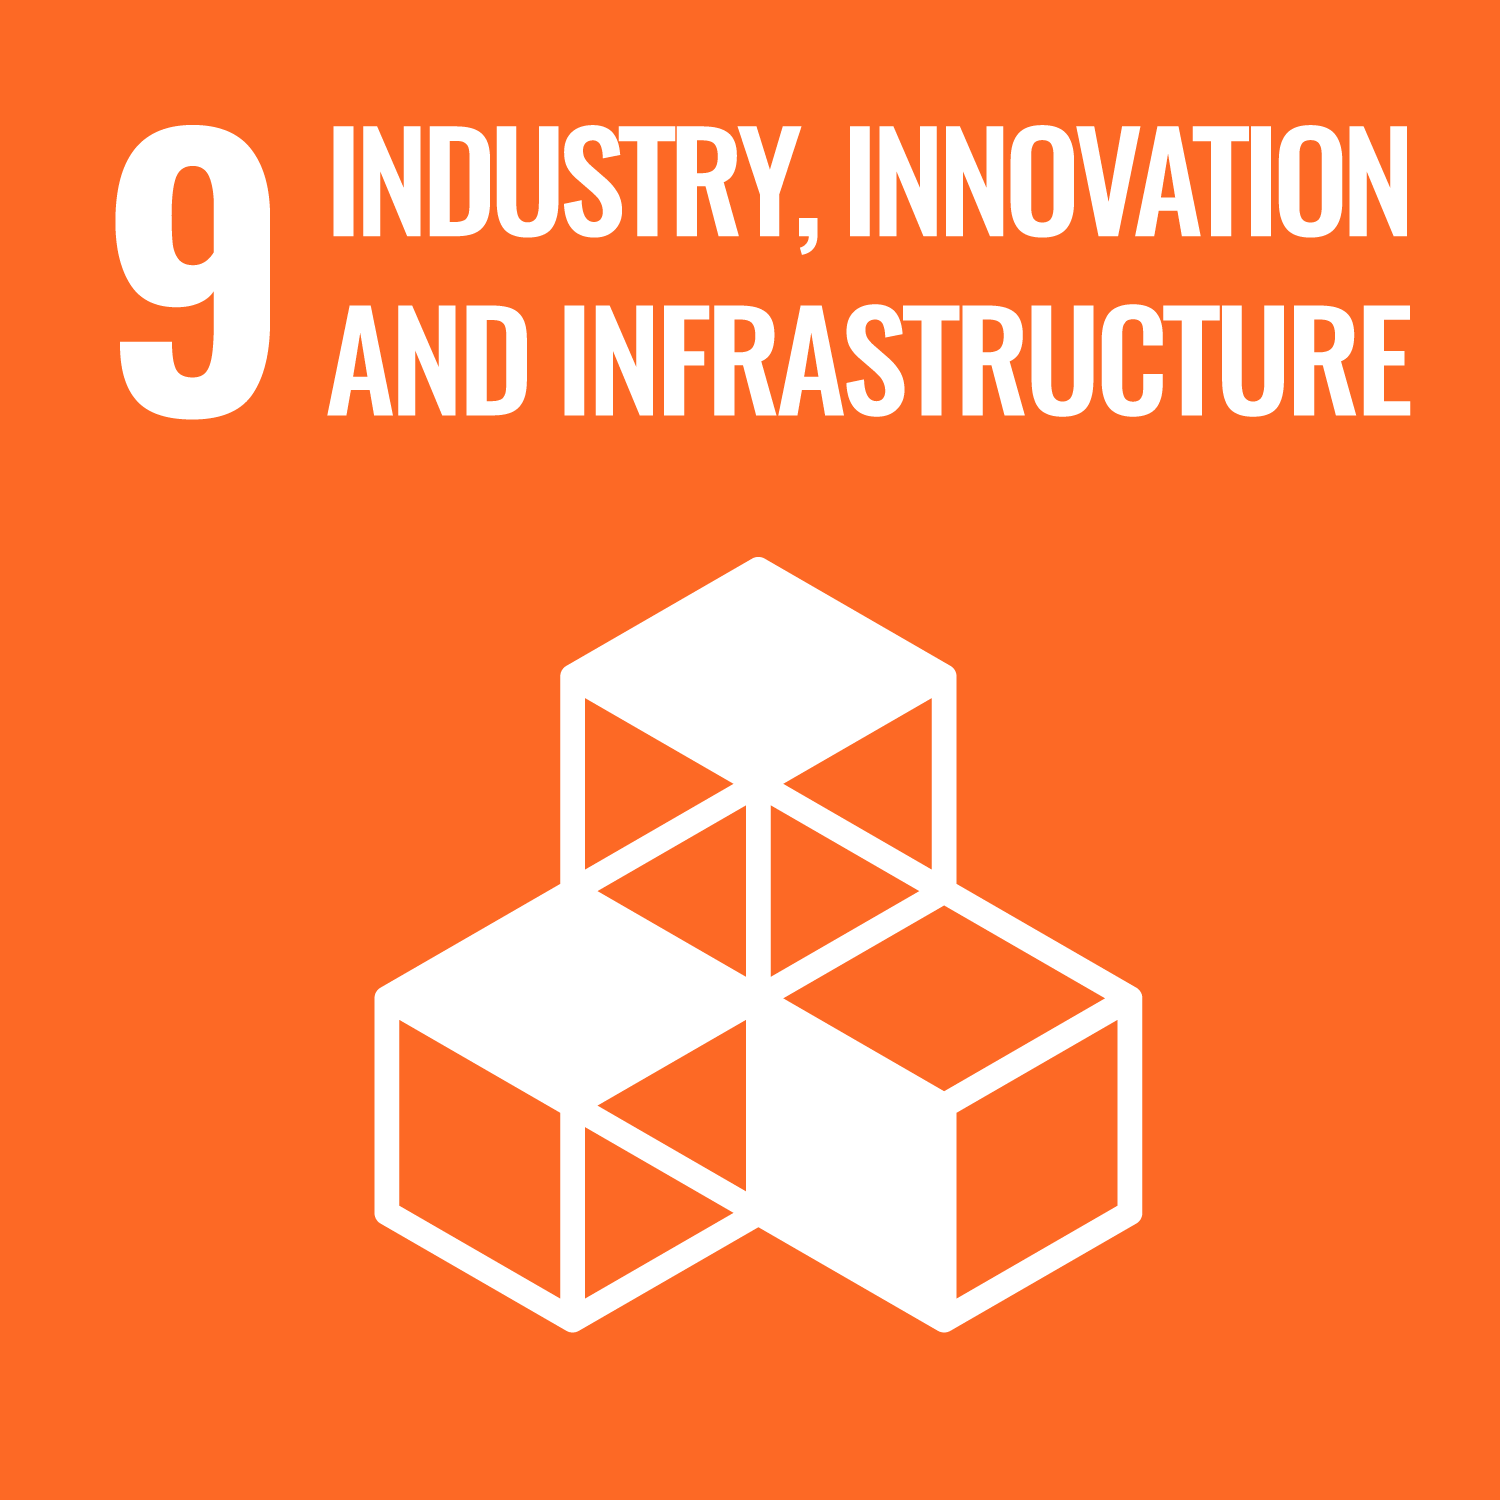 Industry, innovation and infrastructure / Infraestructura